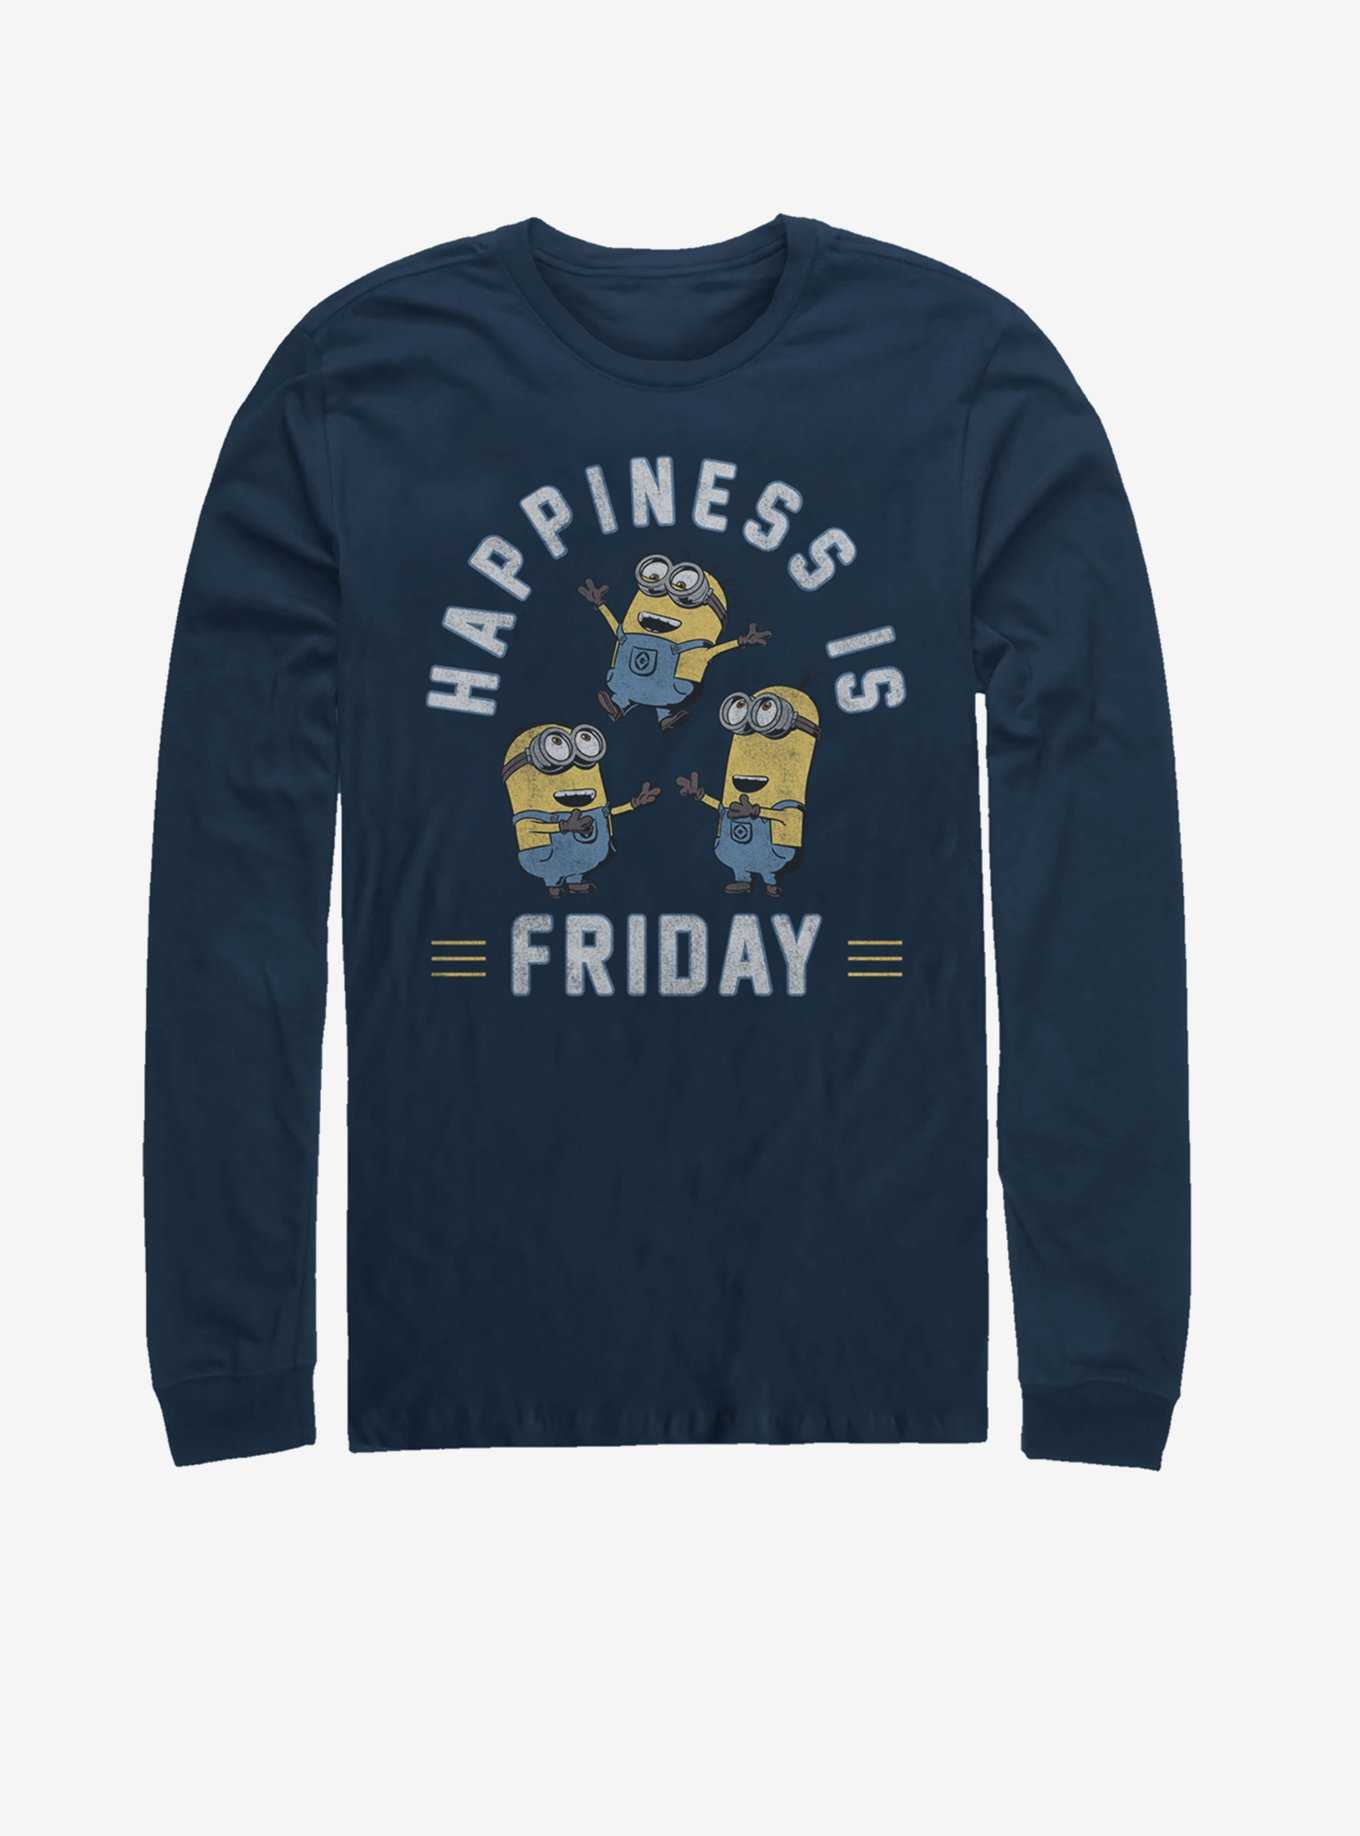 Universal Minion Happiness Is Friday Long-Sleeve T-Shirt, , hi-res